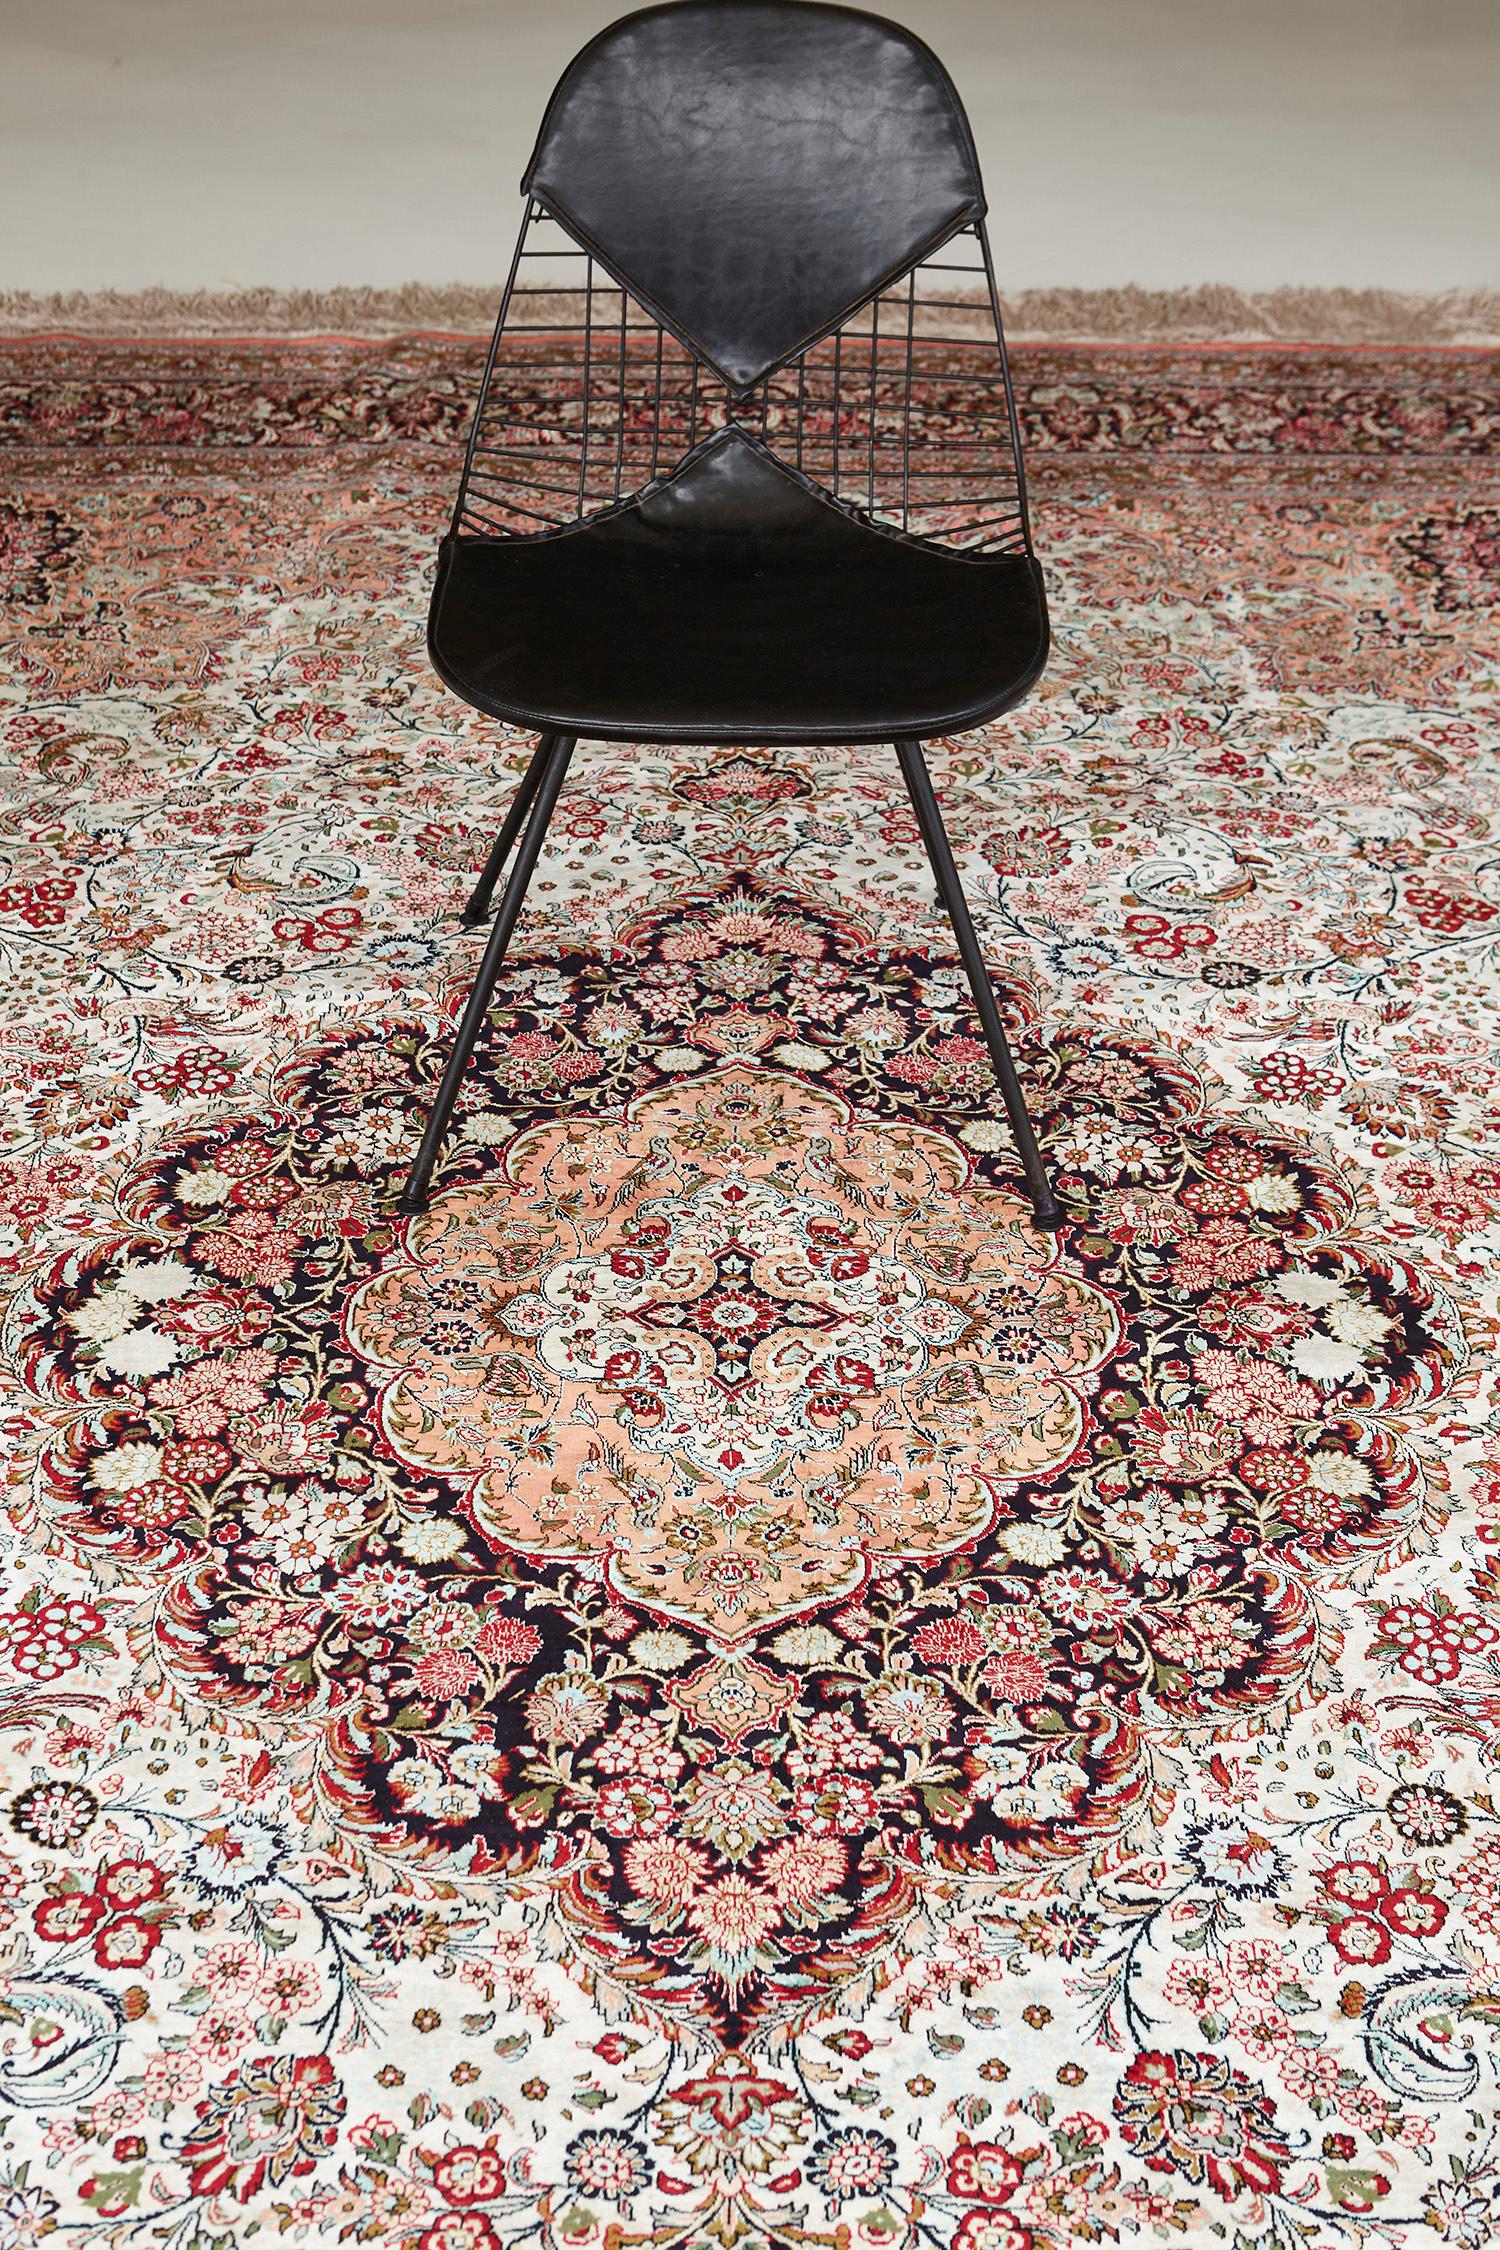 This vivid and trendy masterpiece of the Persian Qum Silk rug from our collection features a majestic all-over design. The grandiose round-cornered diamond pattern with a floral design makes the rug more stylish. A glorious lush and brown pattern is